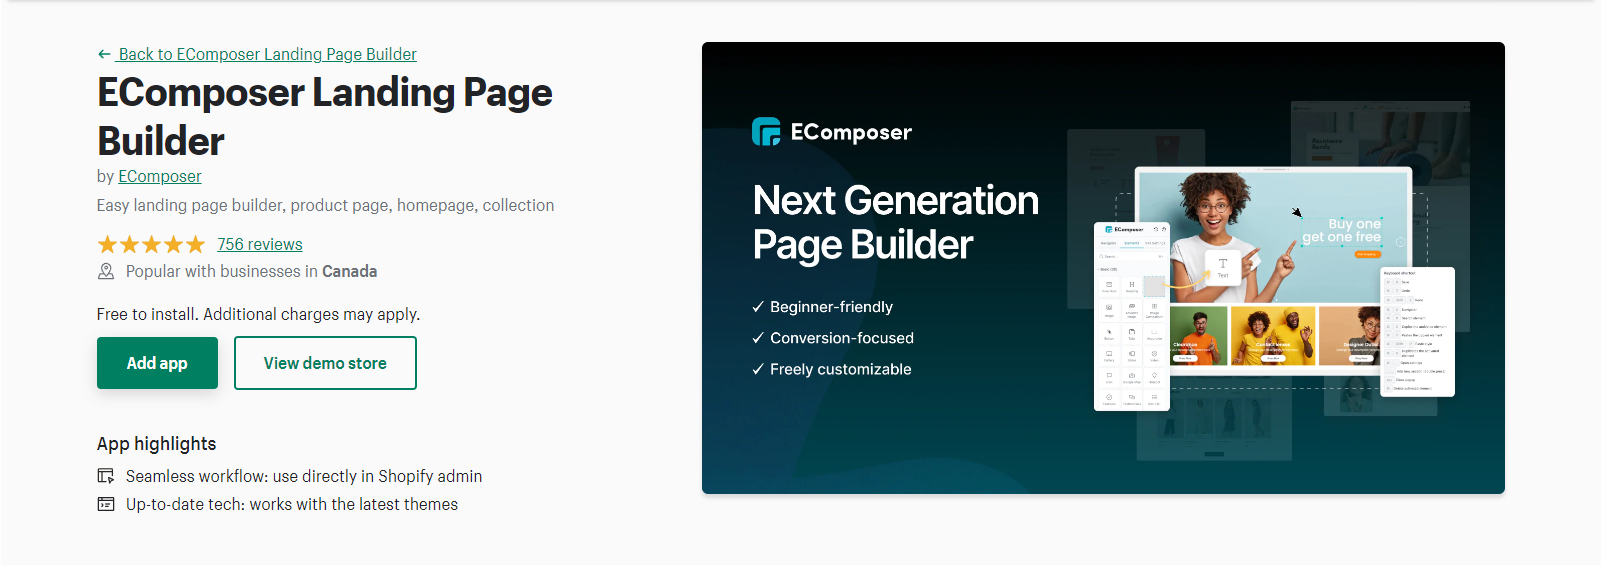 eComposter Landing Page Builder